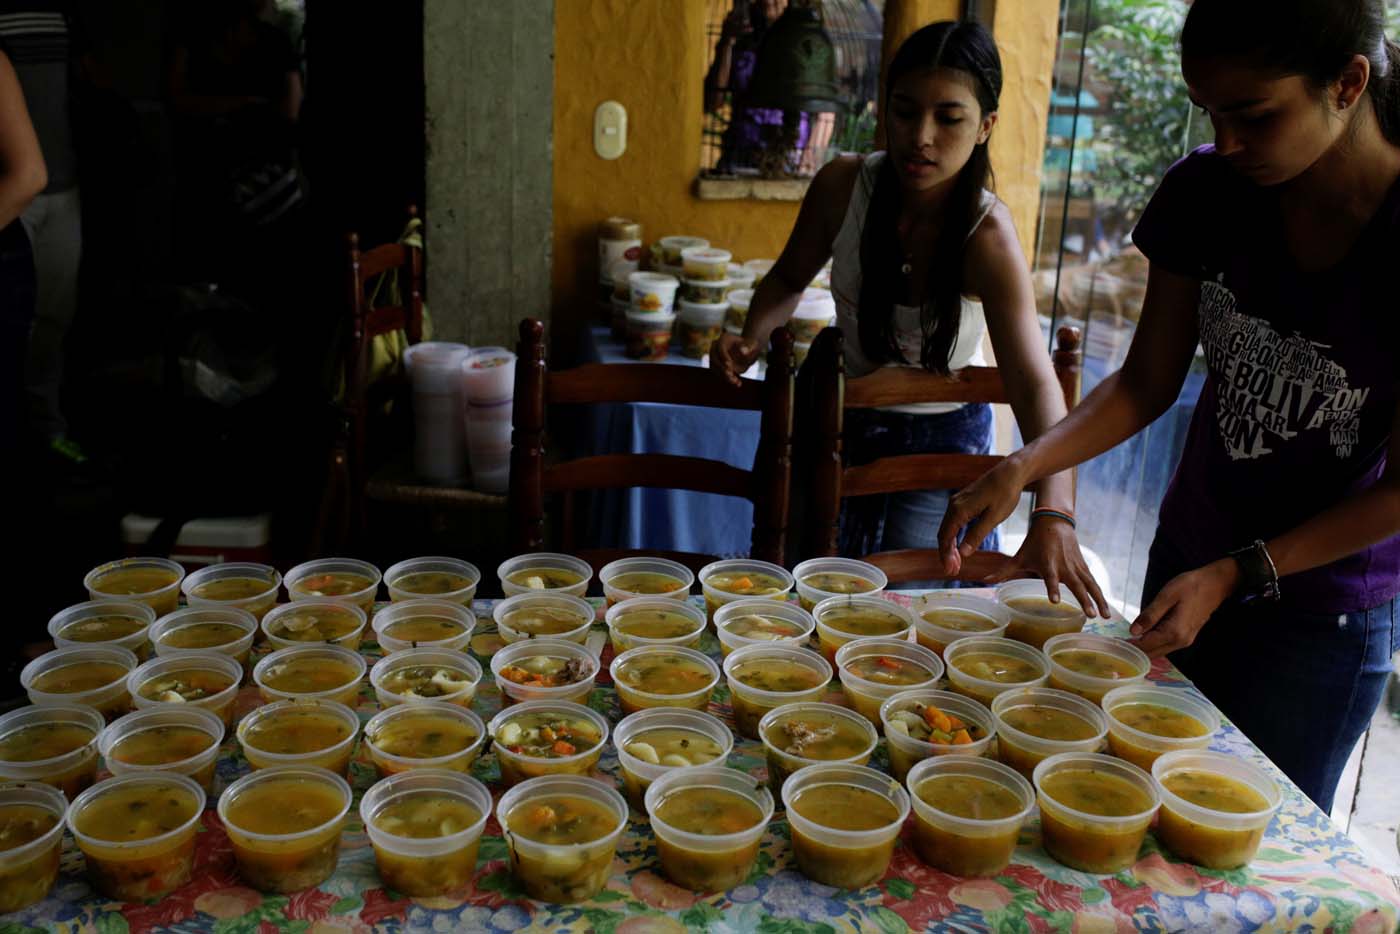 Volunteers of the Make The Difference (Haz La Diferencia) charity initiative serve cups of soup to be donated, at the home kitchen of one of the volunteers in Caracas, Venezuela March 5, 2017. Picture taken March 5, 2017. REUTERS/Marco Bello